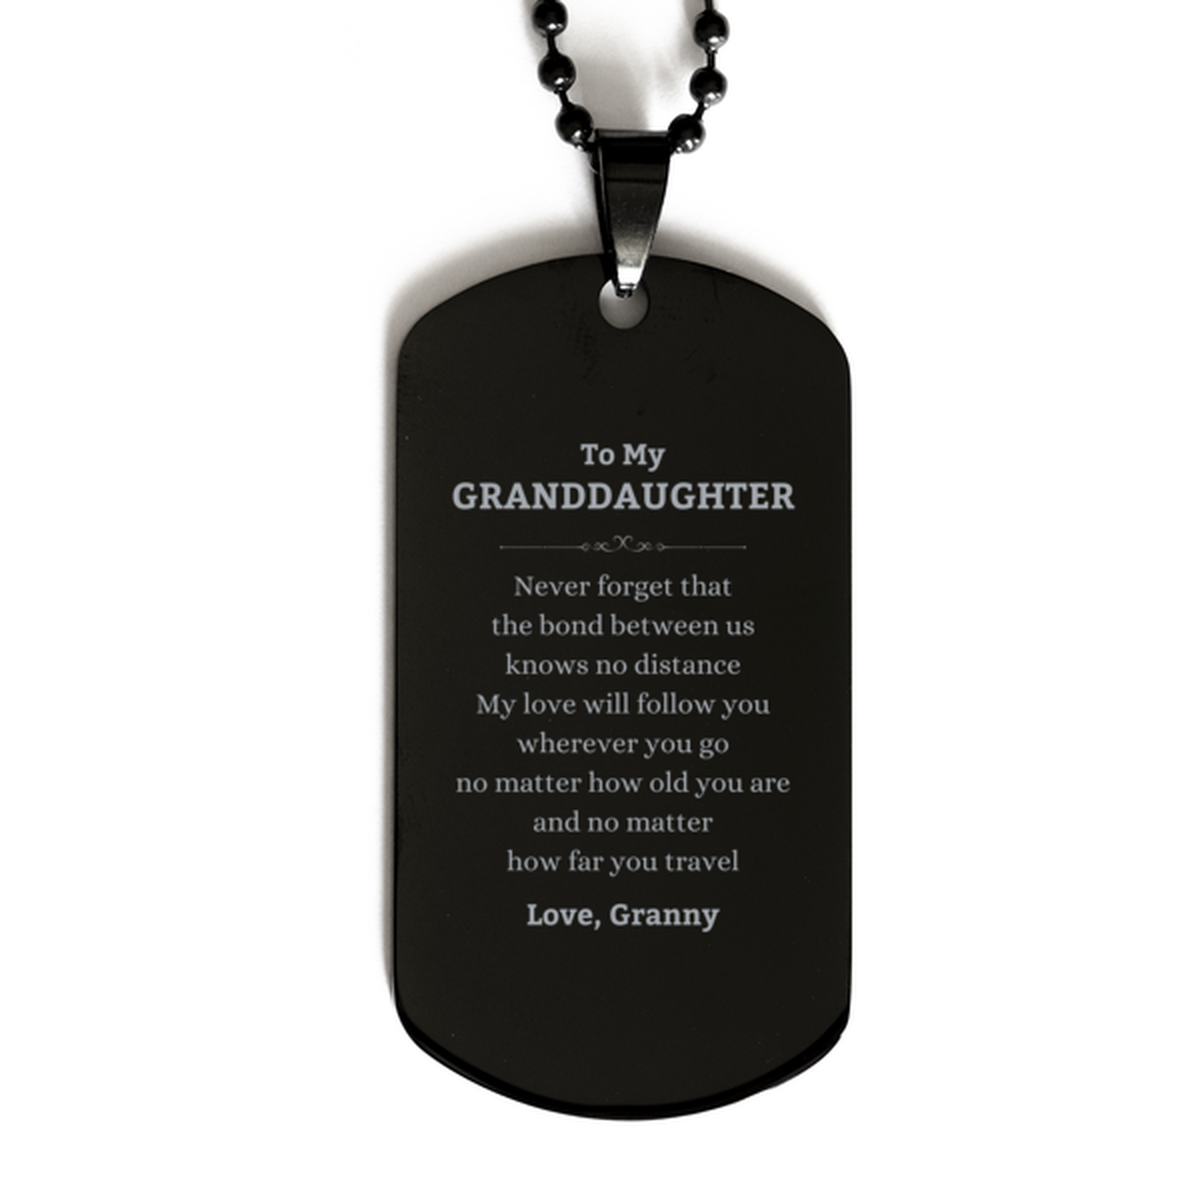 Granddaughter Birthday Gifts from Granny, Adjustable Black Dog Tag for Granddaughter Christmas Graduation Unique Gifts Granddaughter Never forget that the bond between us knows no distance. Love, Granny